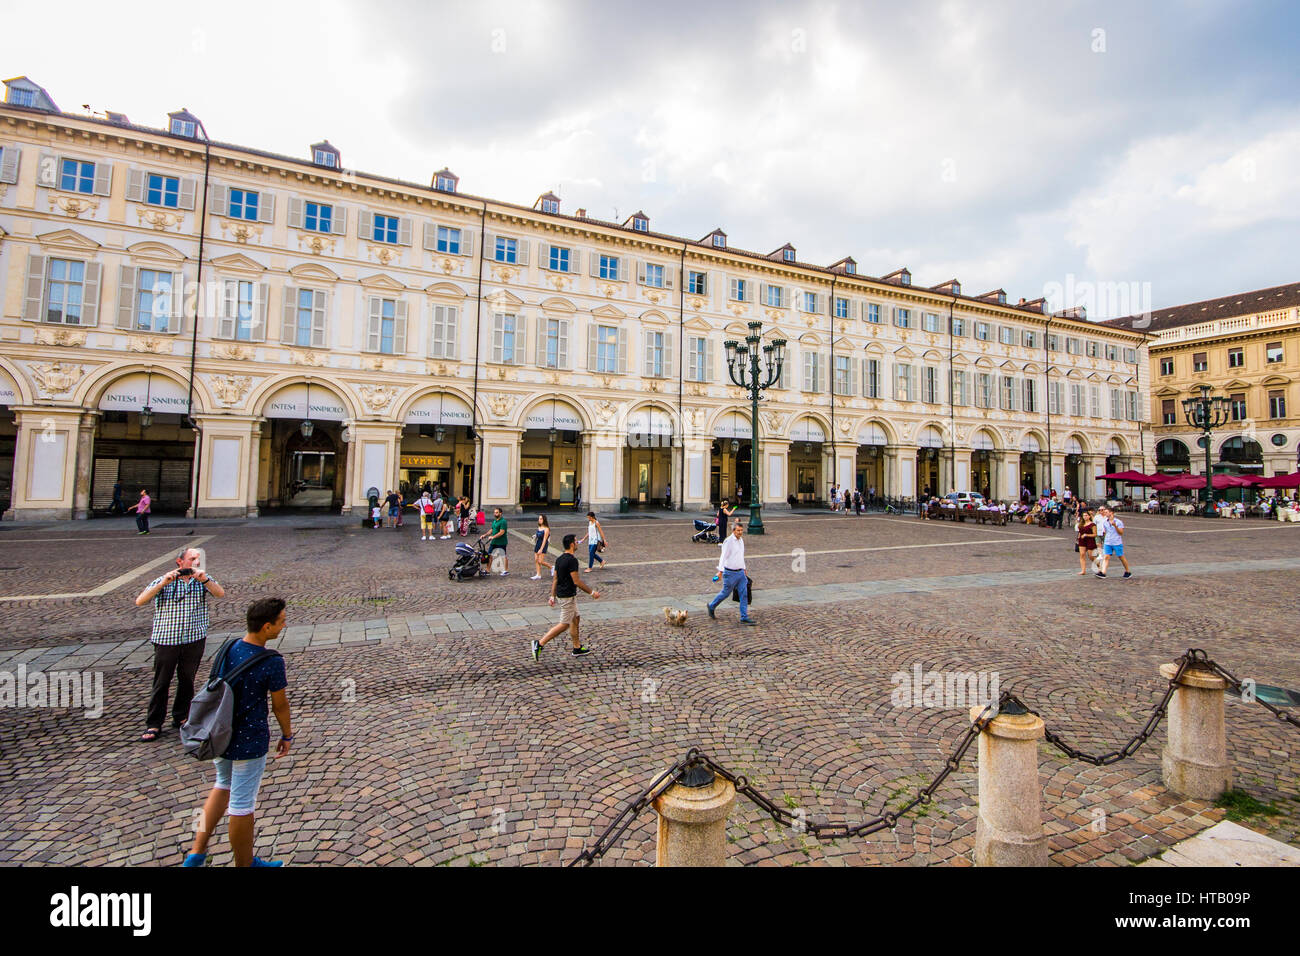 Monuments of Piazza San Carlo, one of the main city squares in Turin, Italy. Stock Photo